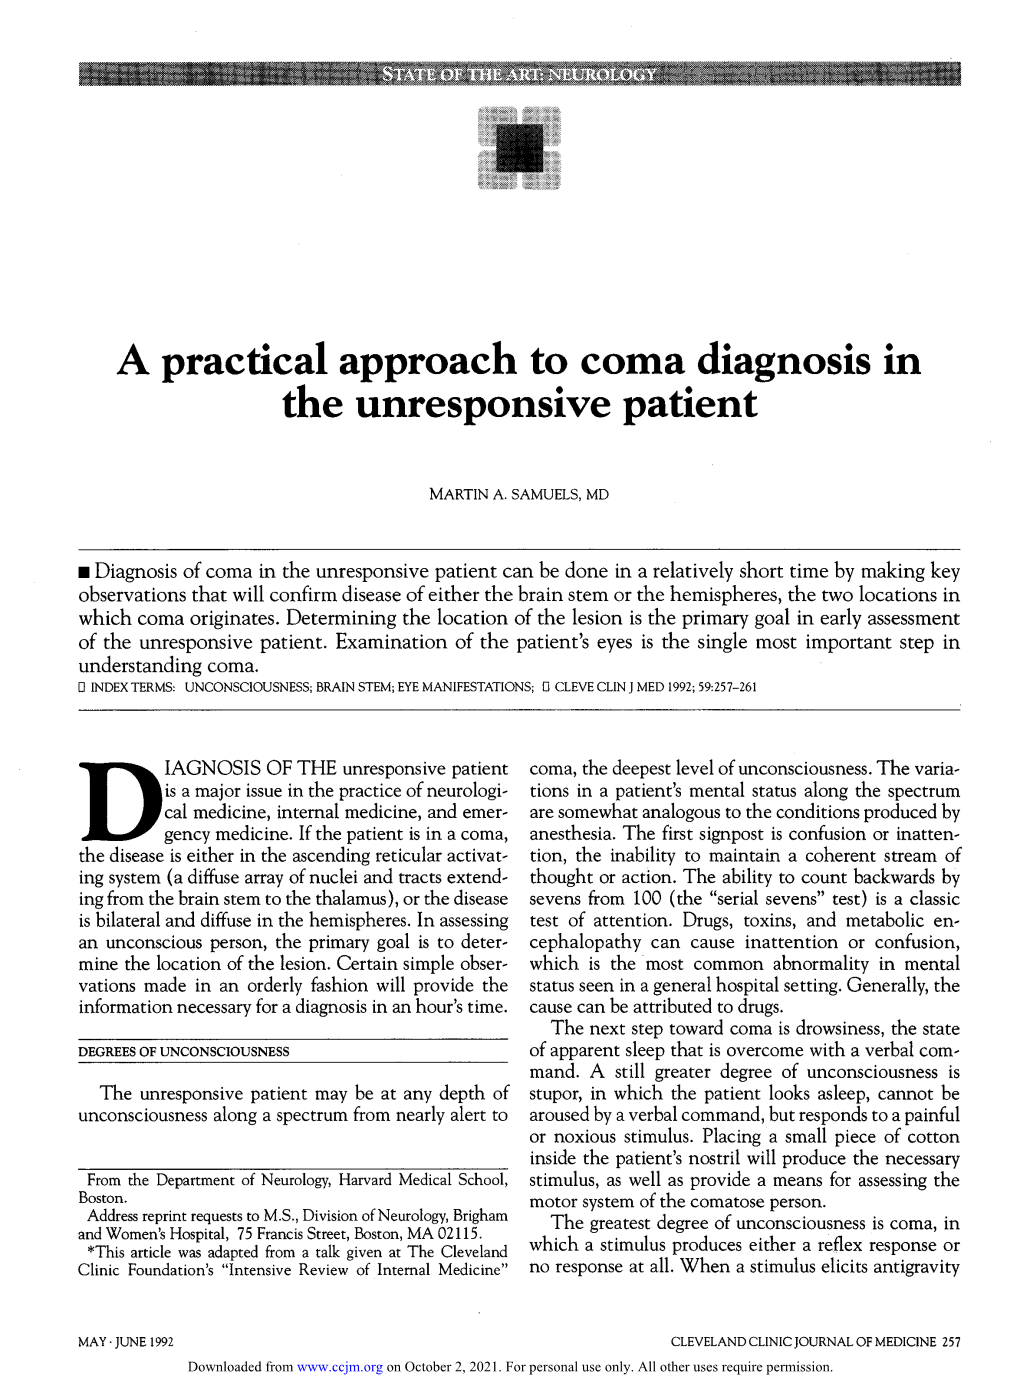 A Practical Approach to Coma Diagnosis in the Unresponsive Patient